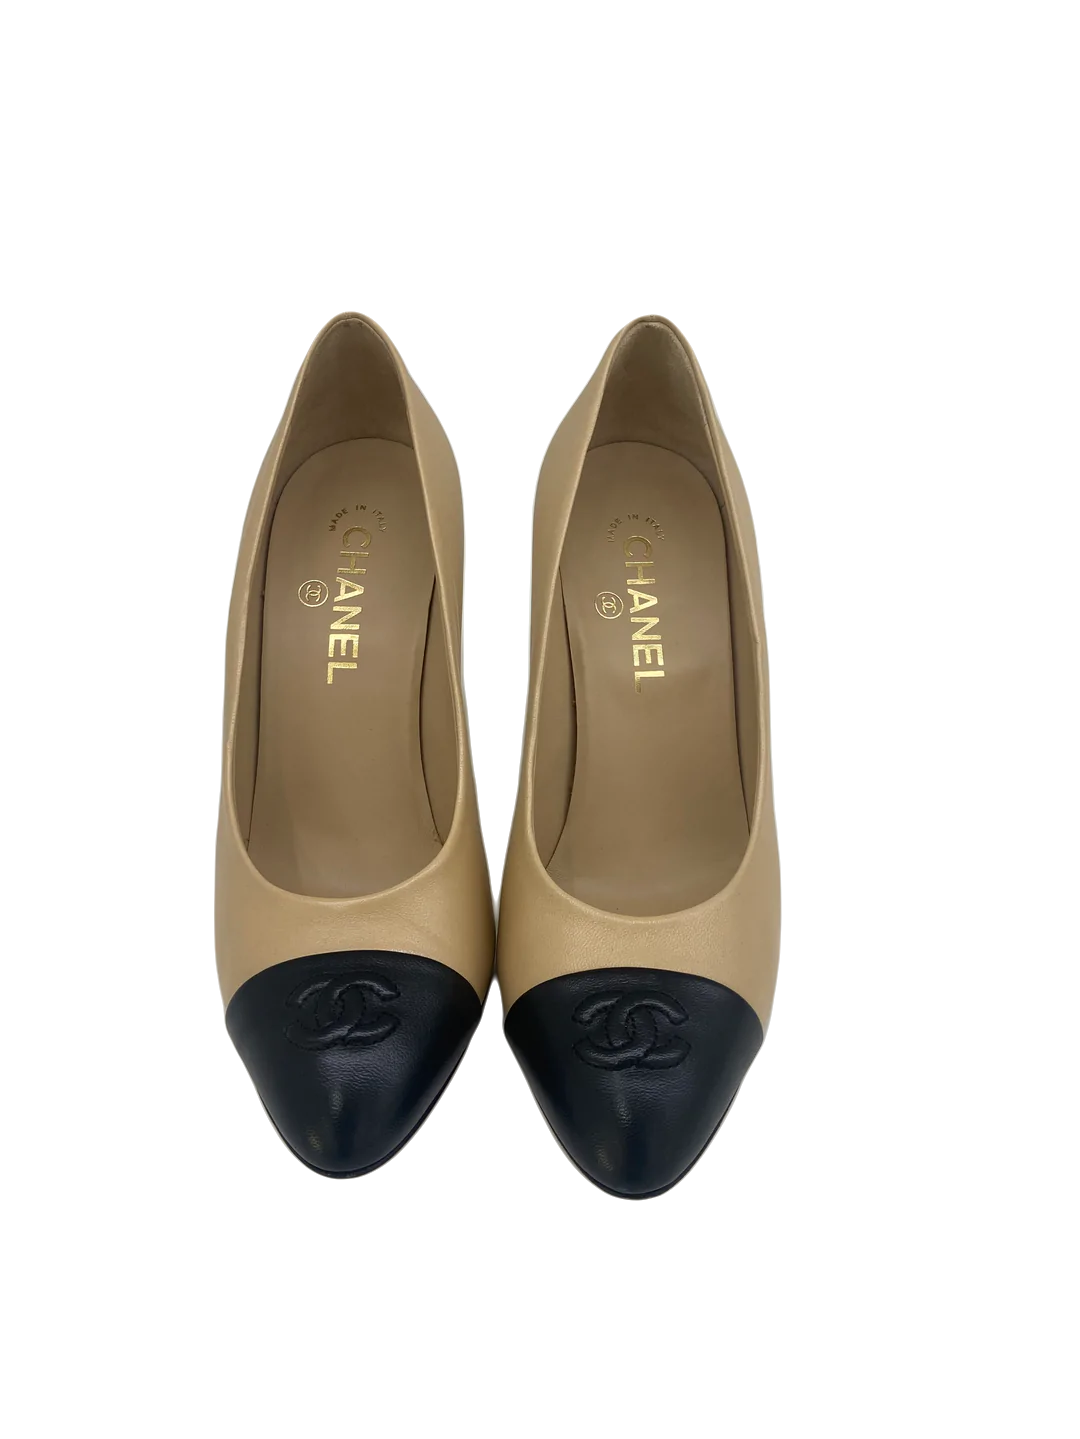 Chanel Nude Pumps Size 38C - SOLD